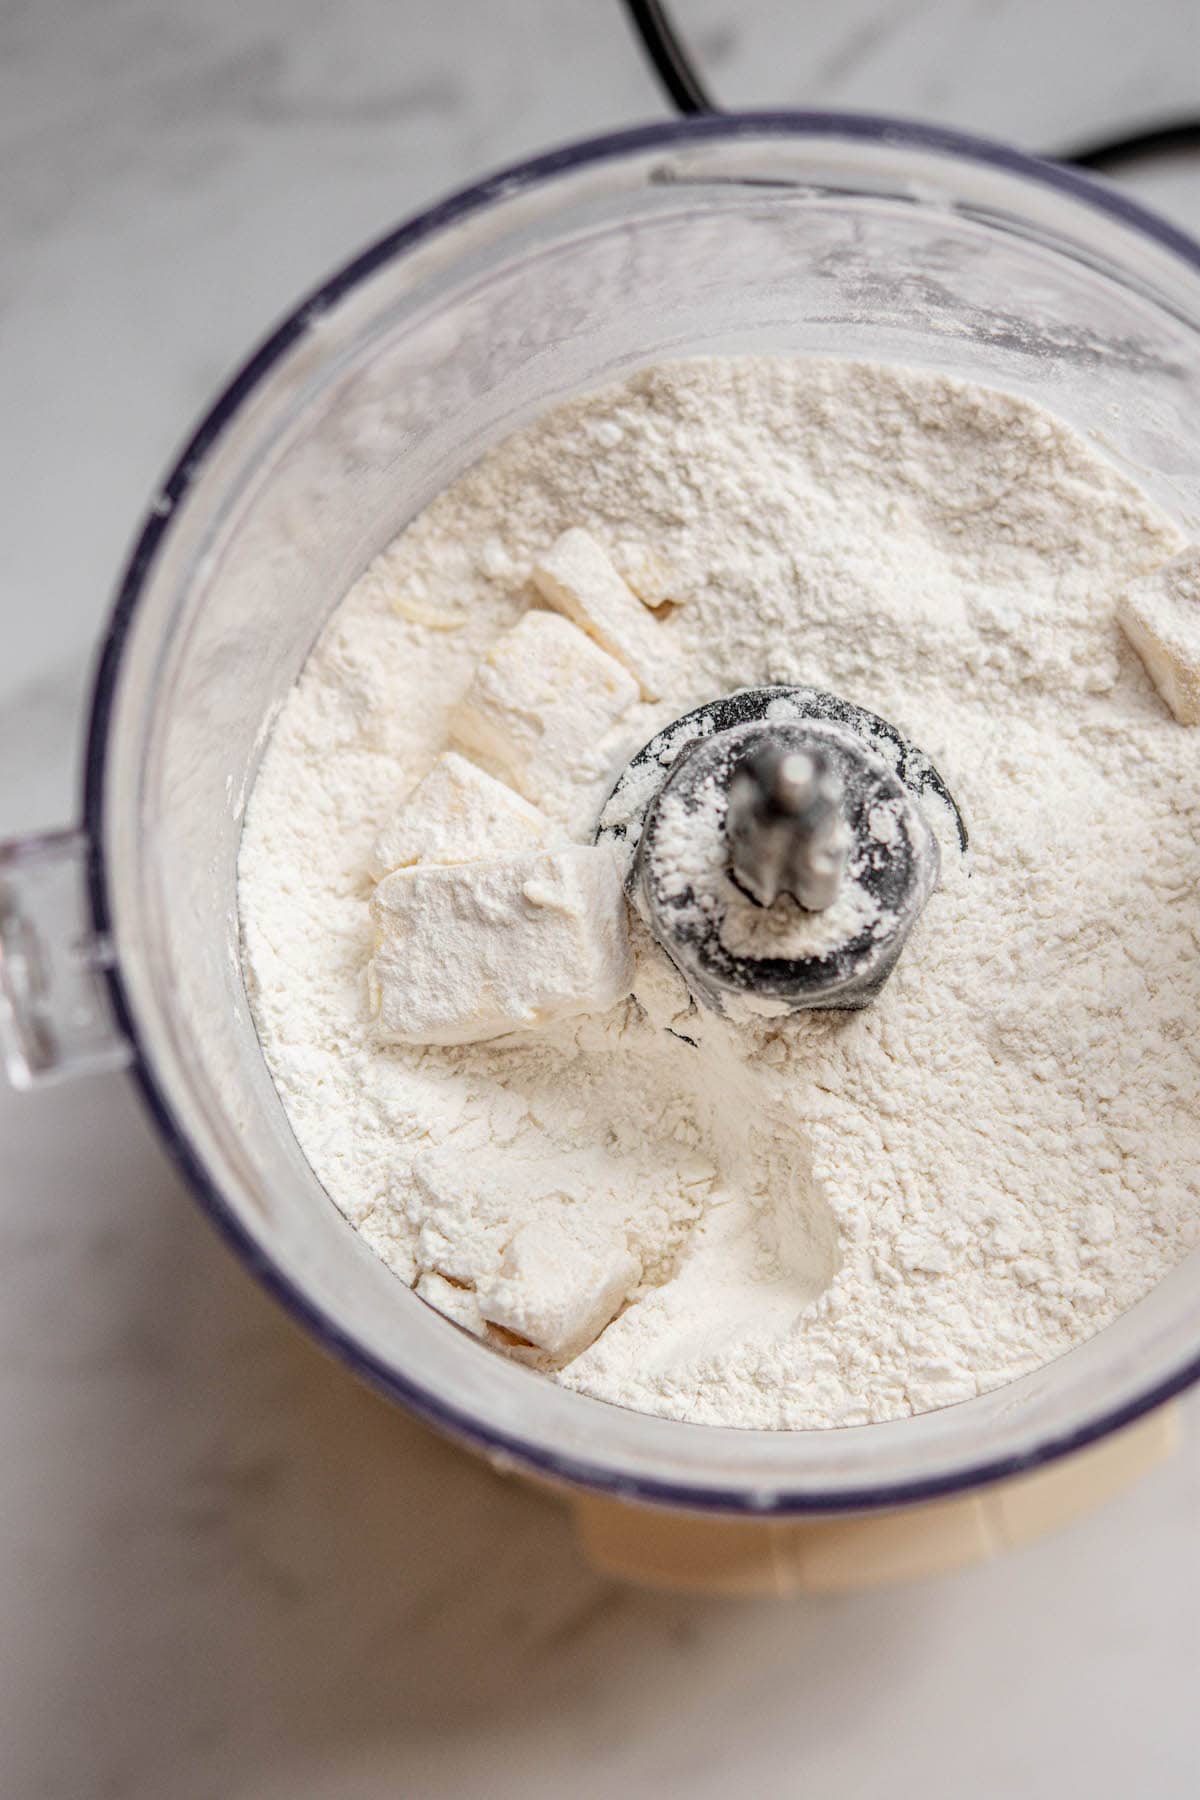 flour and butter pieces in a blender.